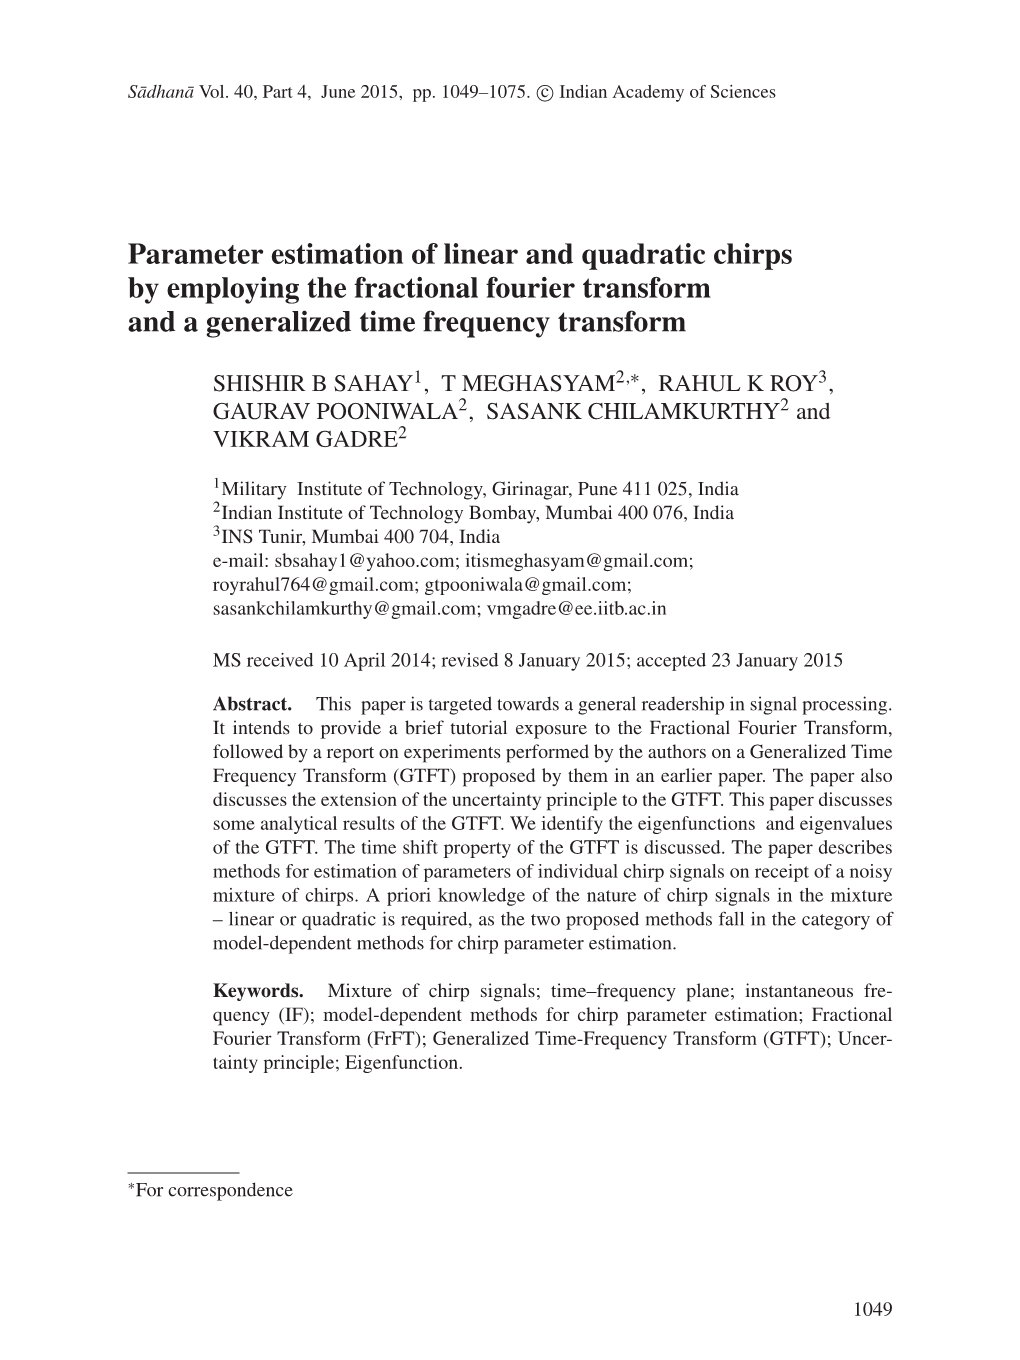 Parameter Estimation of Linear and Quadratic Chirps by Employing the Fractional Fourier Transform and a Generalized Time Frequency Transform